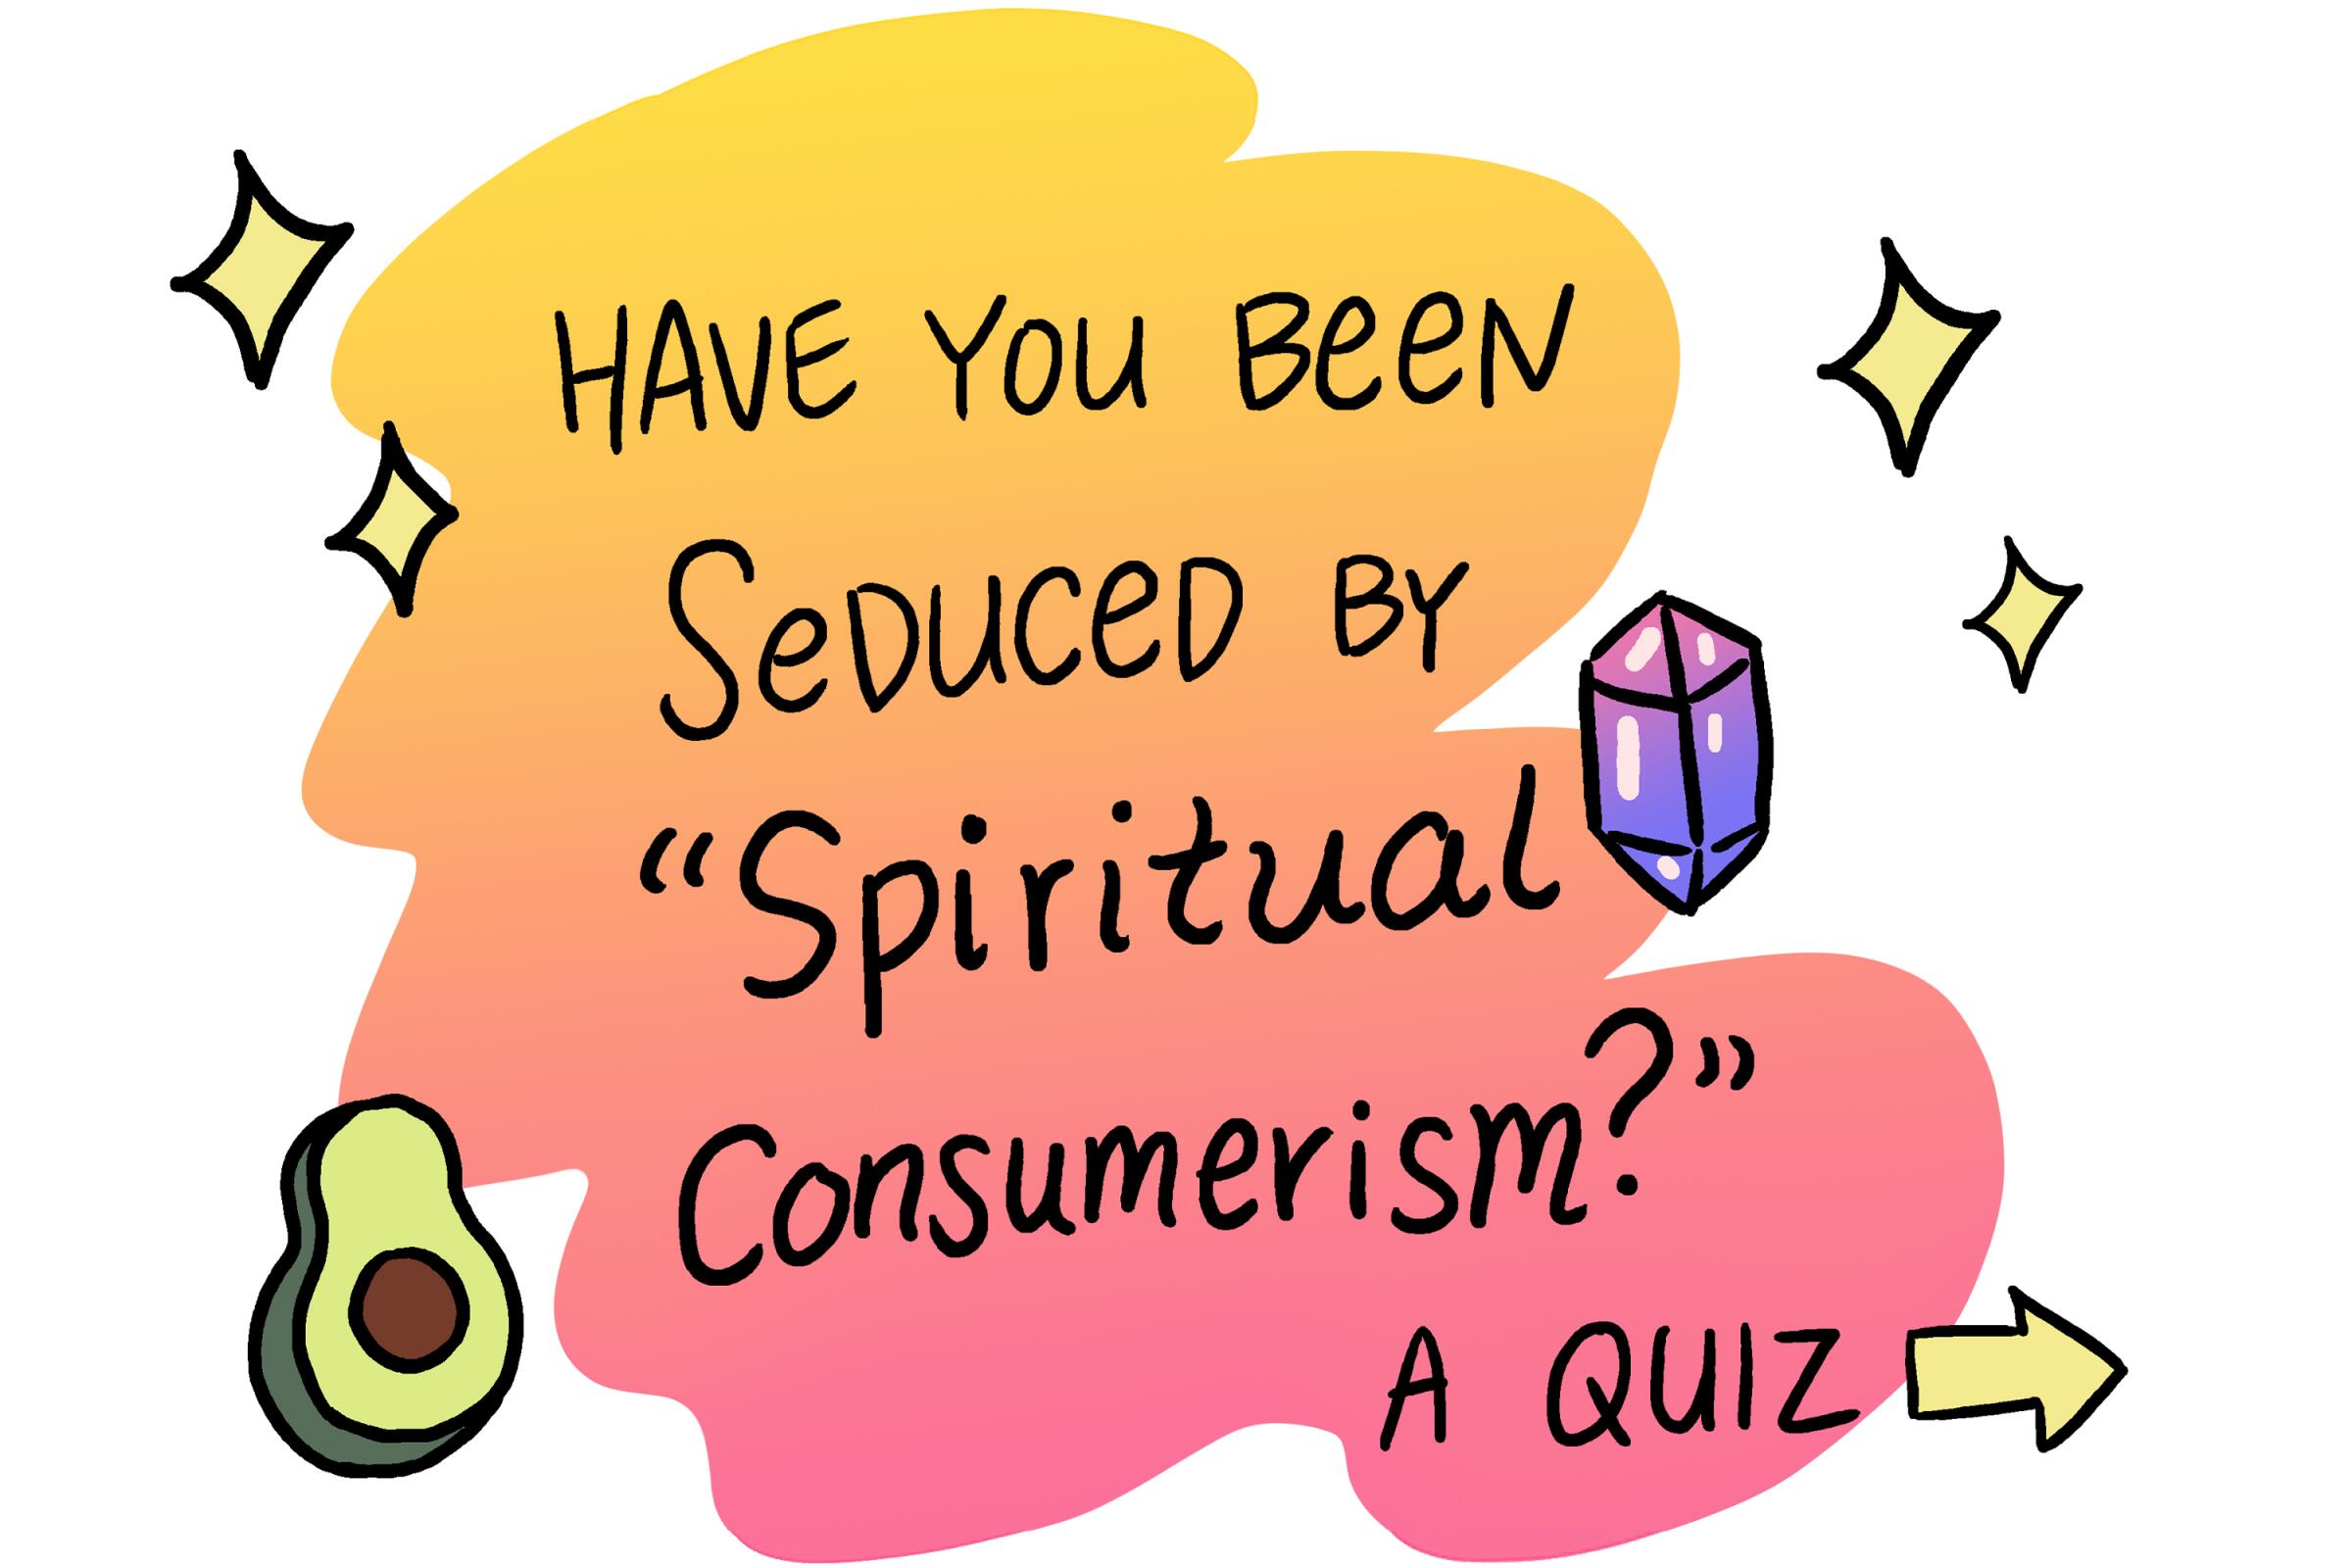 "Have you been seduced by 'spiritual consumerism?' A quiz" text with sparkles, an avocado and crystal around it.